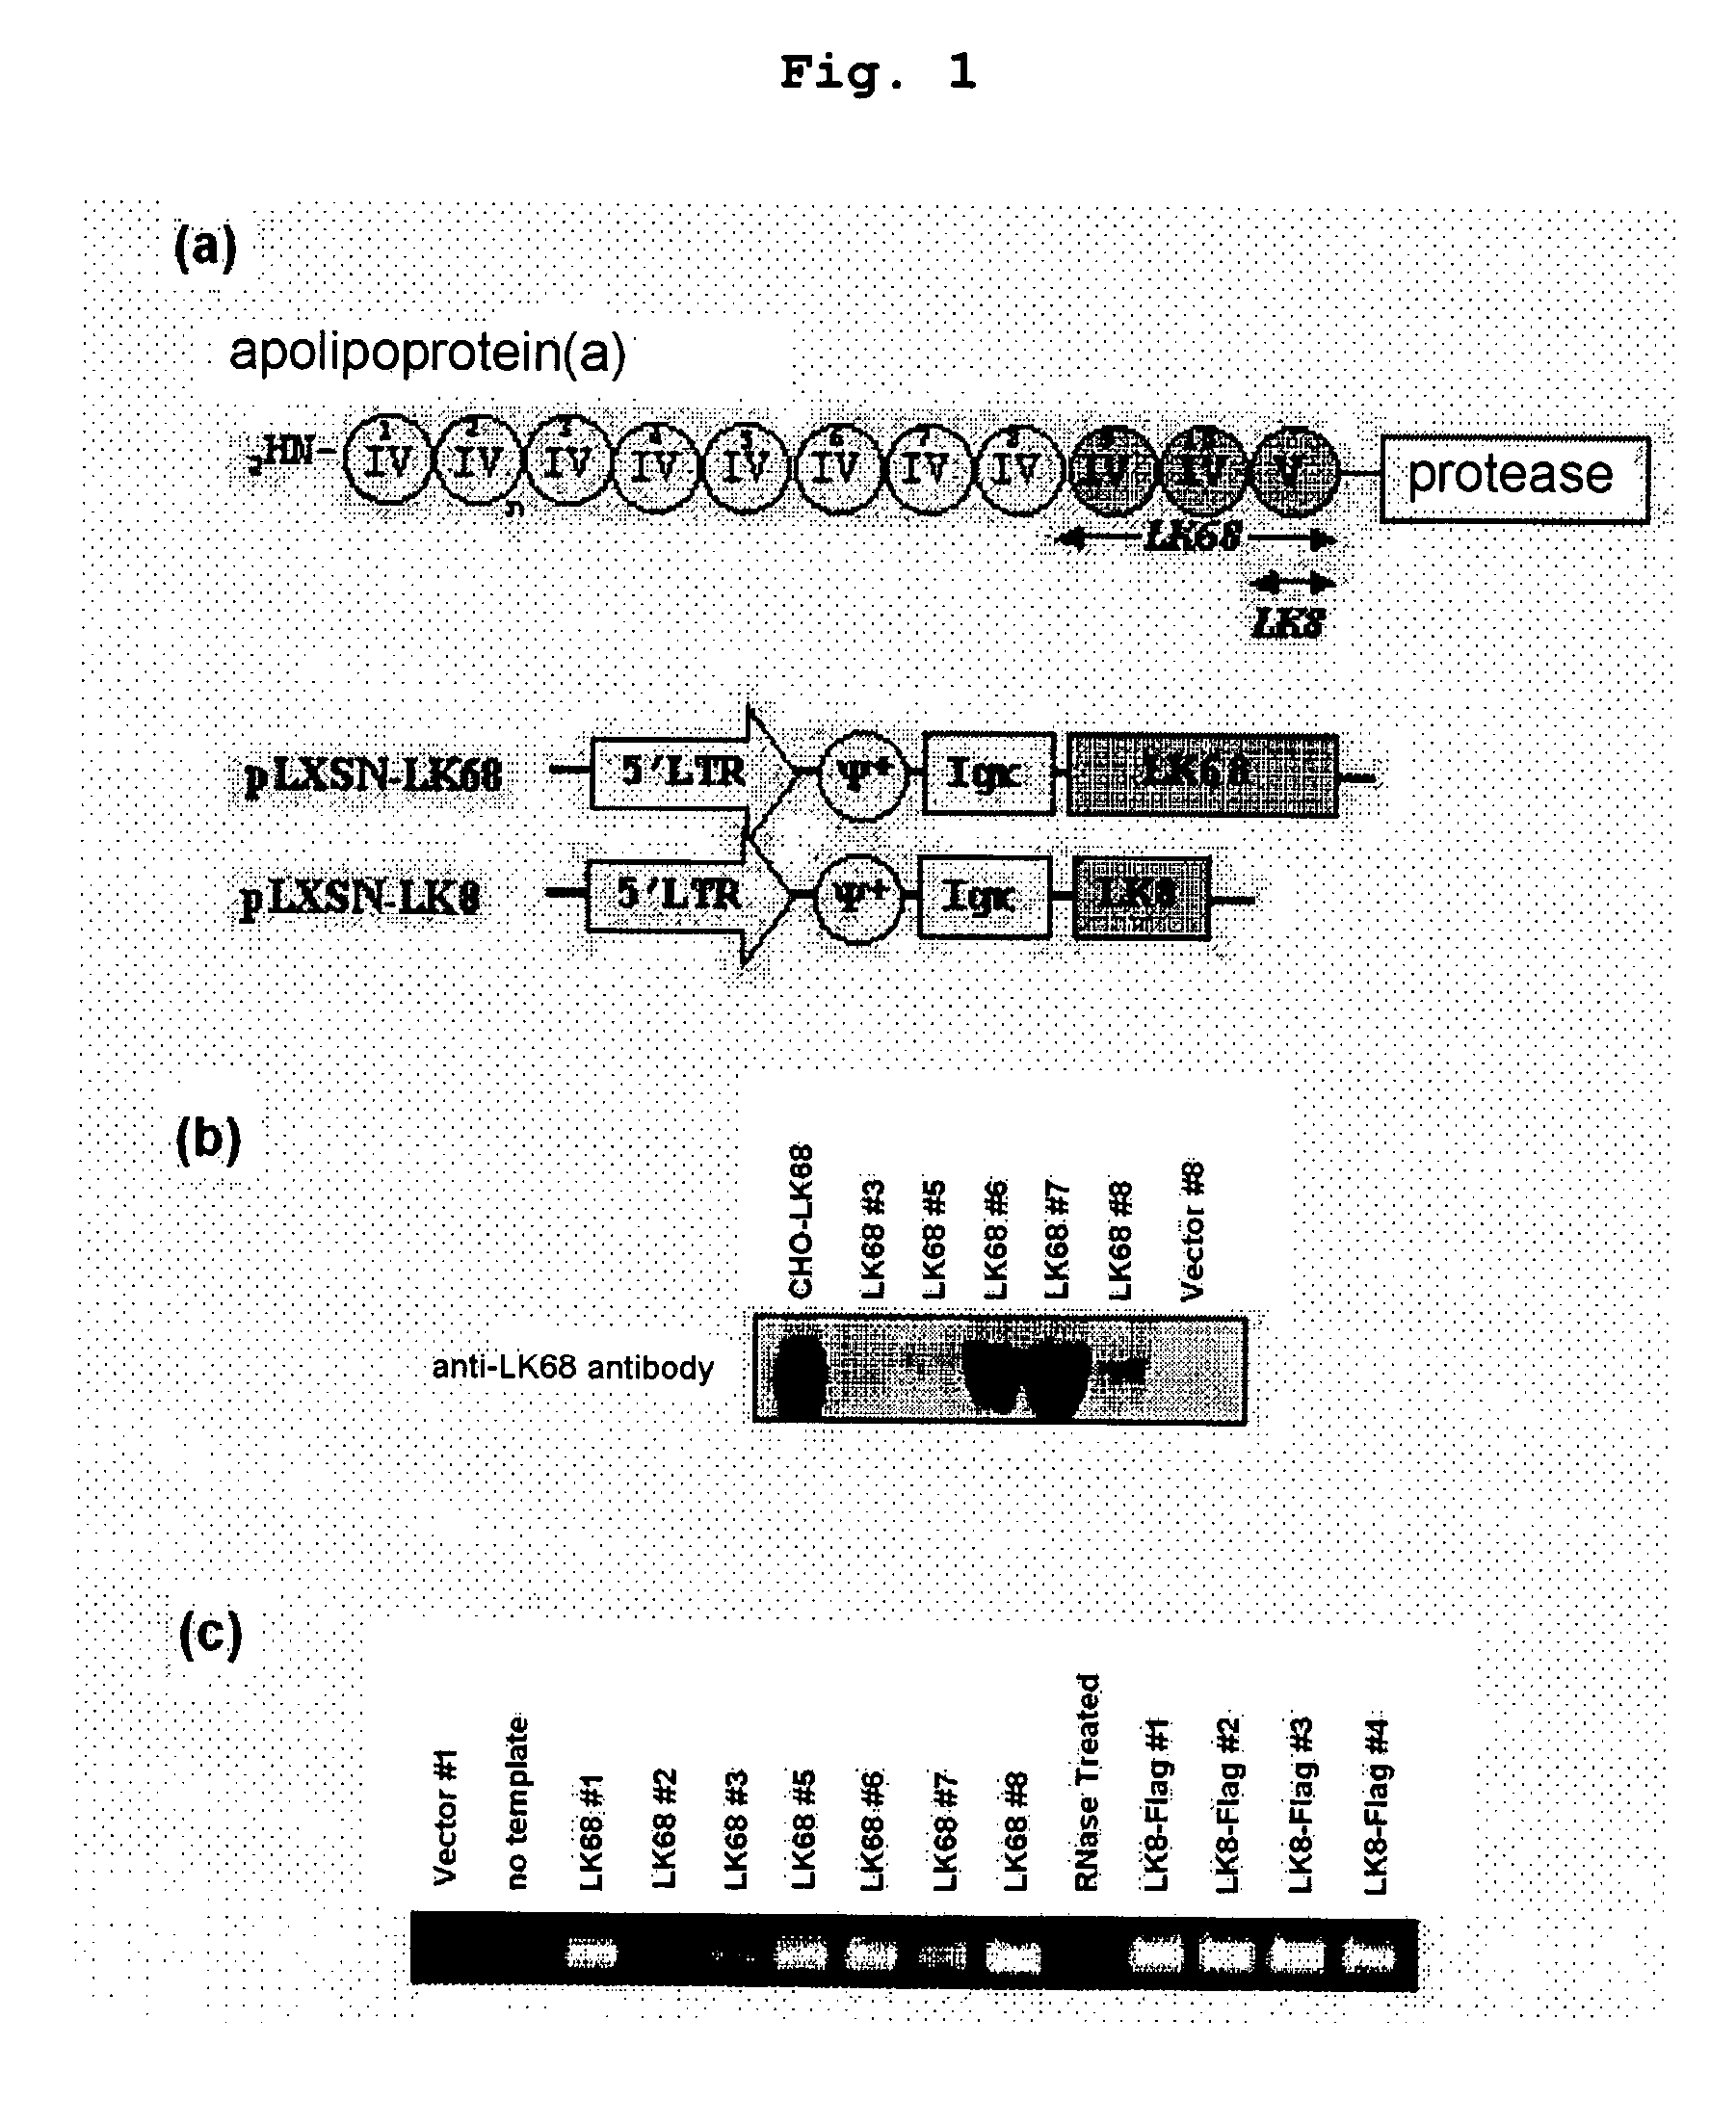 Therapeutic agent for treatment of cancer comprising human apolipoprotein (a) kringles lk68 or lk8 genes as effective ingredient, and method for treating cancer using the same